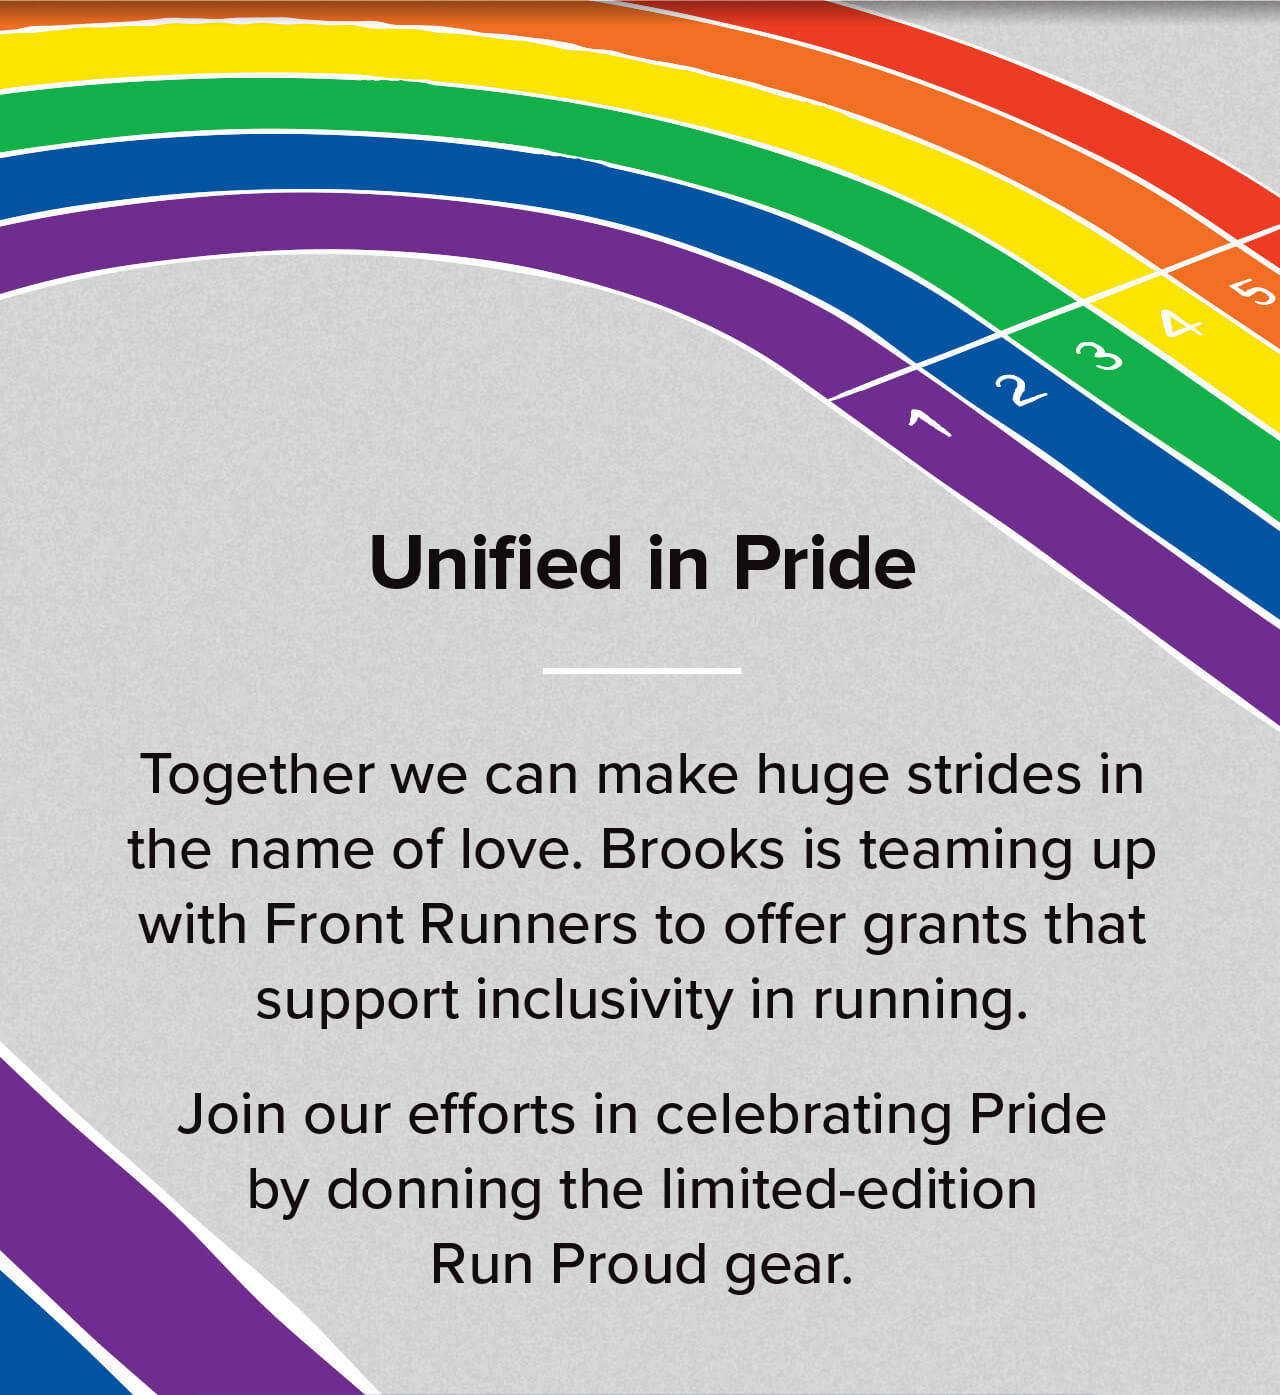 Unified in Pride | Together we can make huge strides in the name o f love. Brooks is teaming up with Front Runners to offer grants that support inclusivity in running. Join our efforts in celebrating Pride by donning the limited-edition Run Proud gear. 